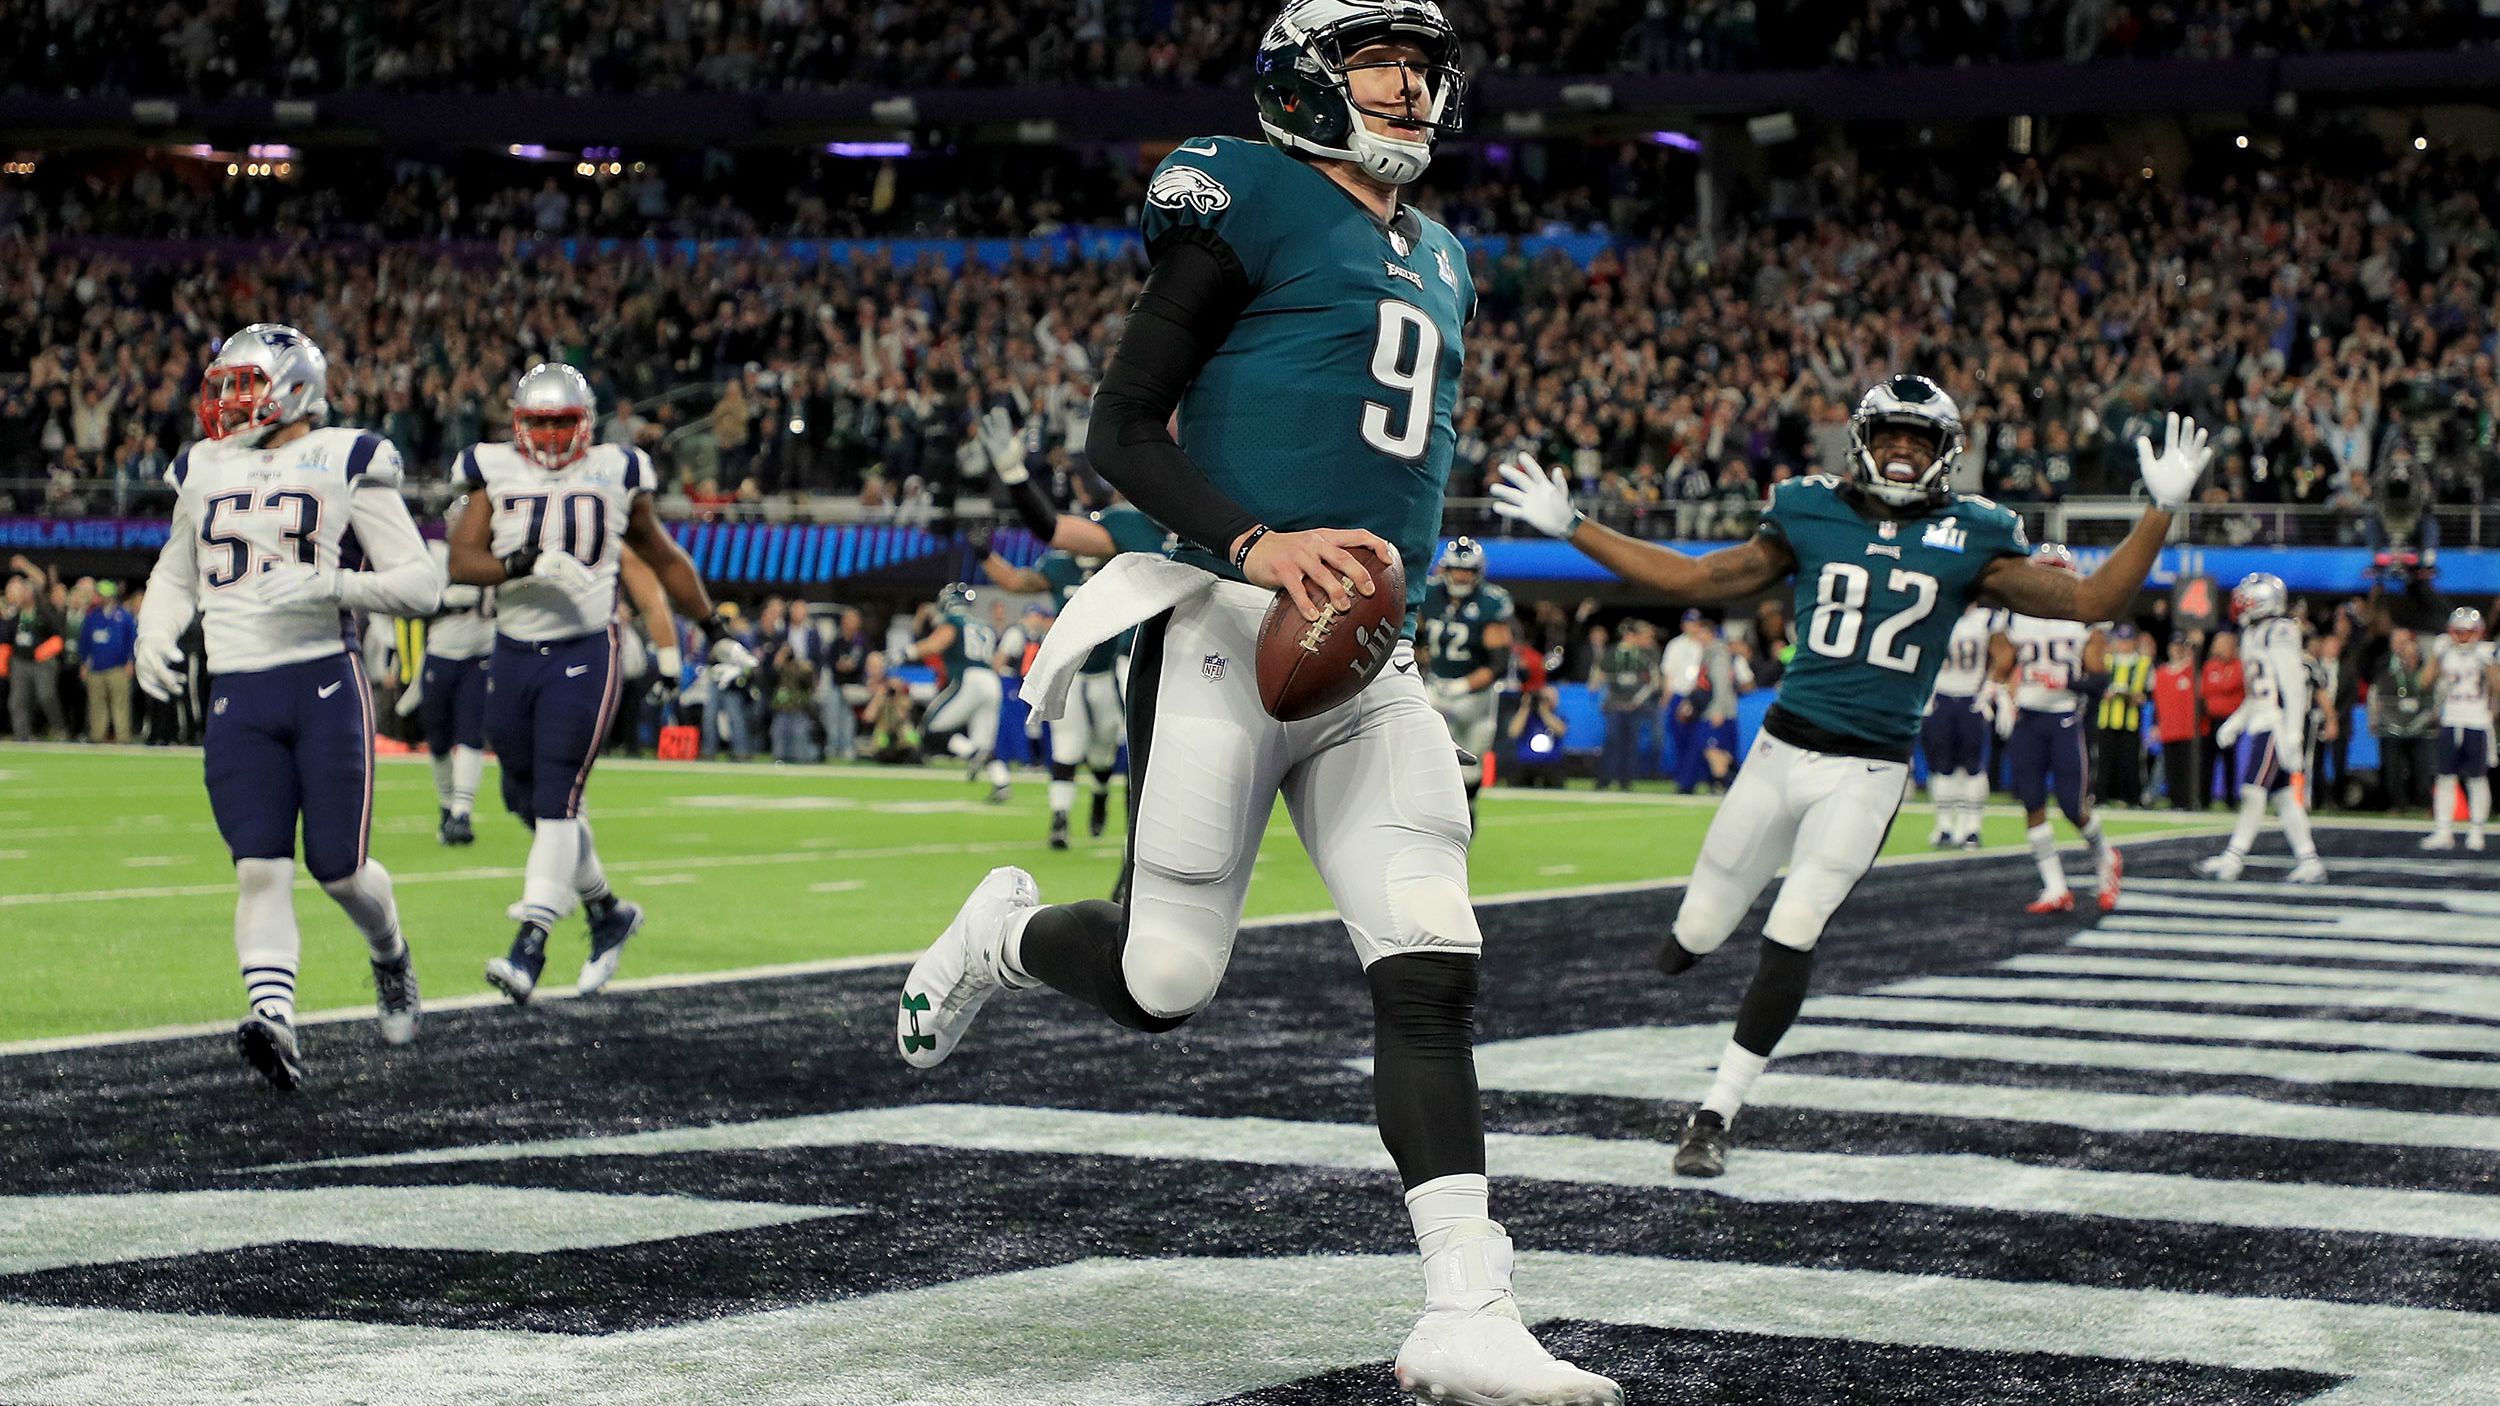 <strong>Super Bowl LII (2018):</strong> Nick Foles wasn't the Philadelphia Eagles' starting quarterback for most of the season. But after Carson Wentz went down for the year with a knee injury, Foles stepped up and led the team to the title. He finished the playoff run by throwing for 373 yards and three touchdowns in a 41-33 victory over New England. He also caught a touchdown pass on a trick play.